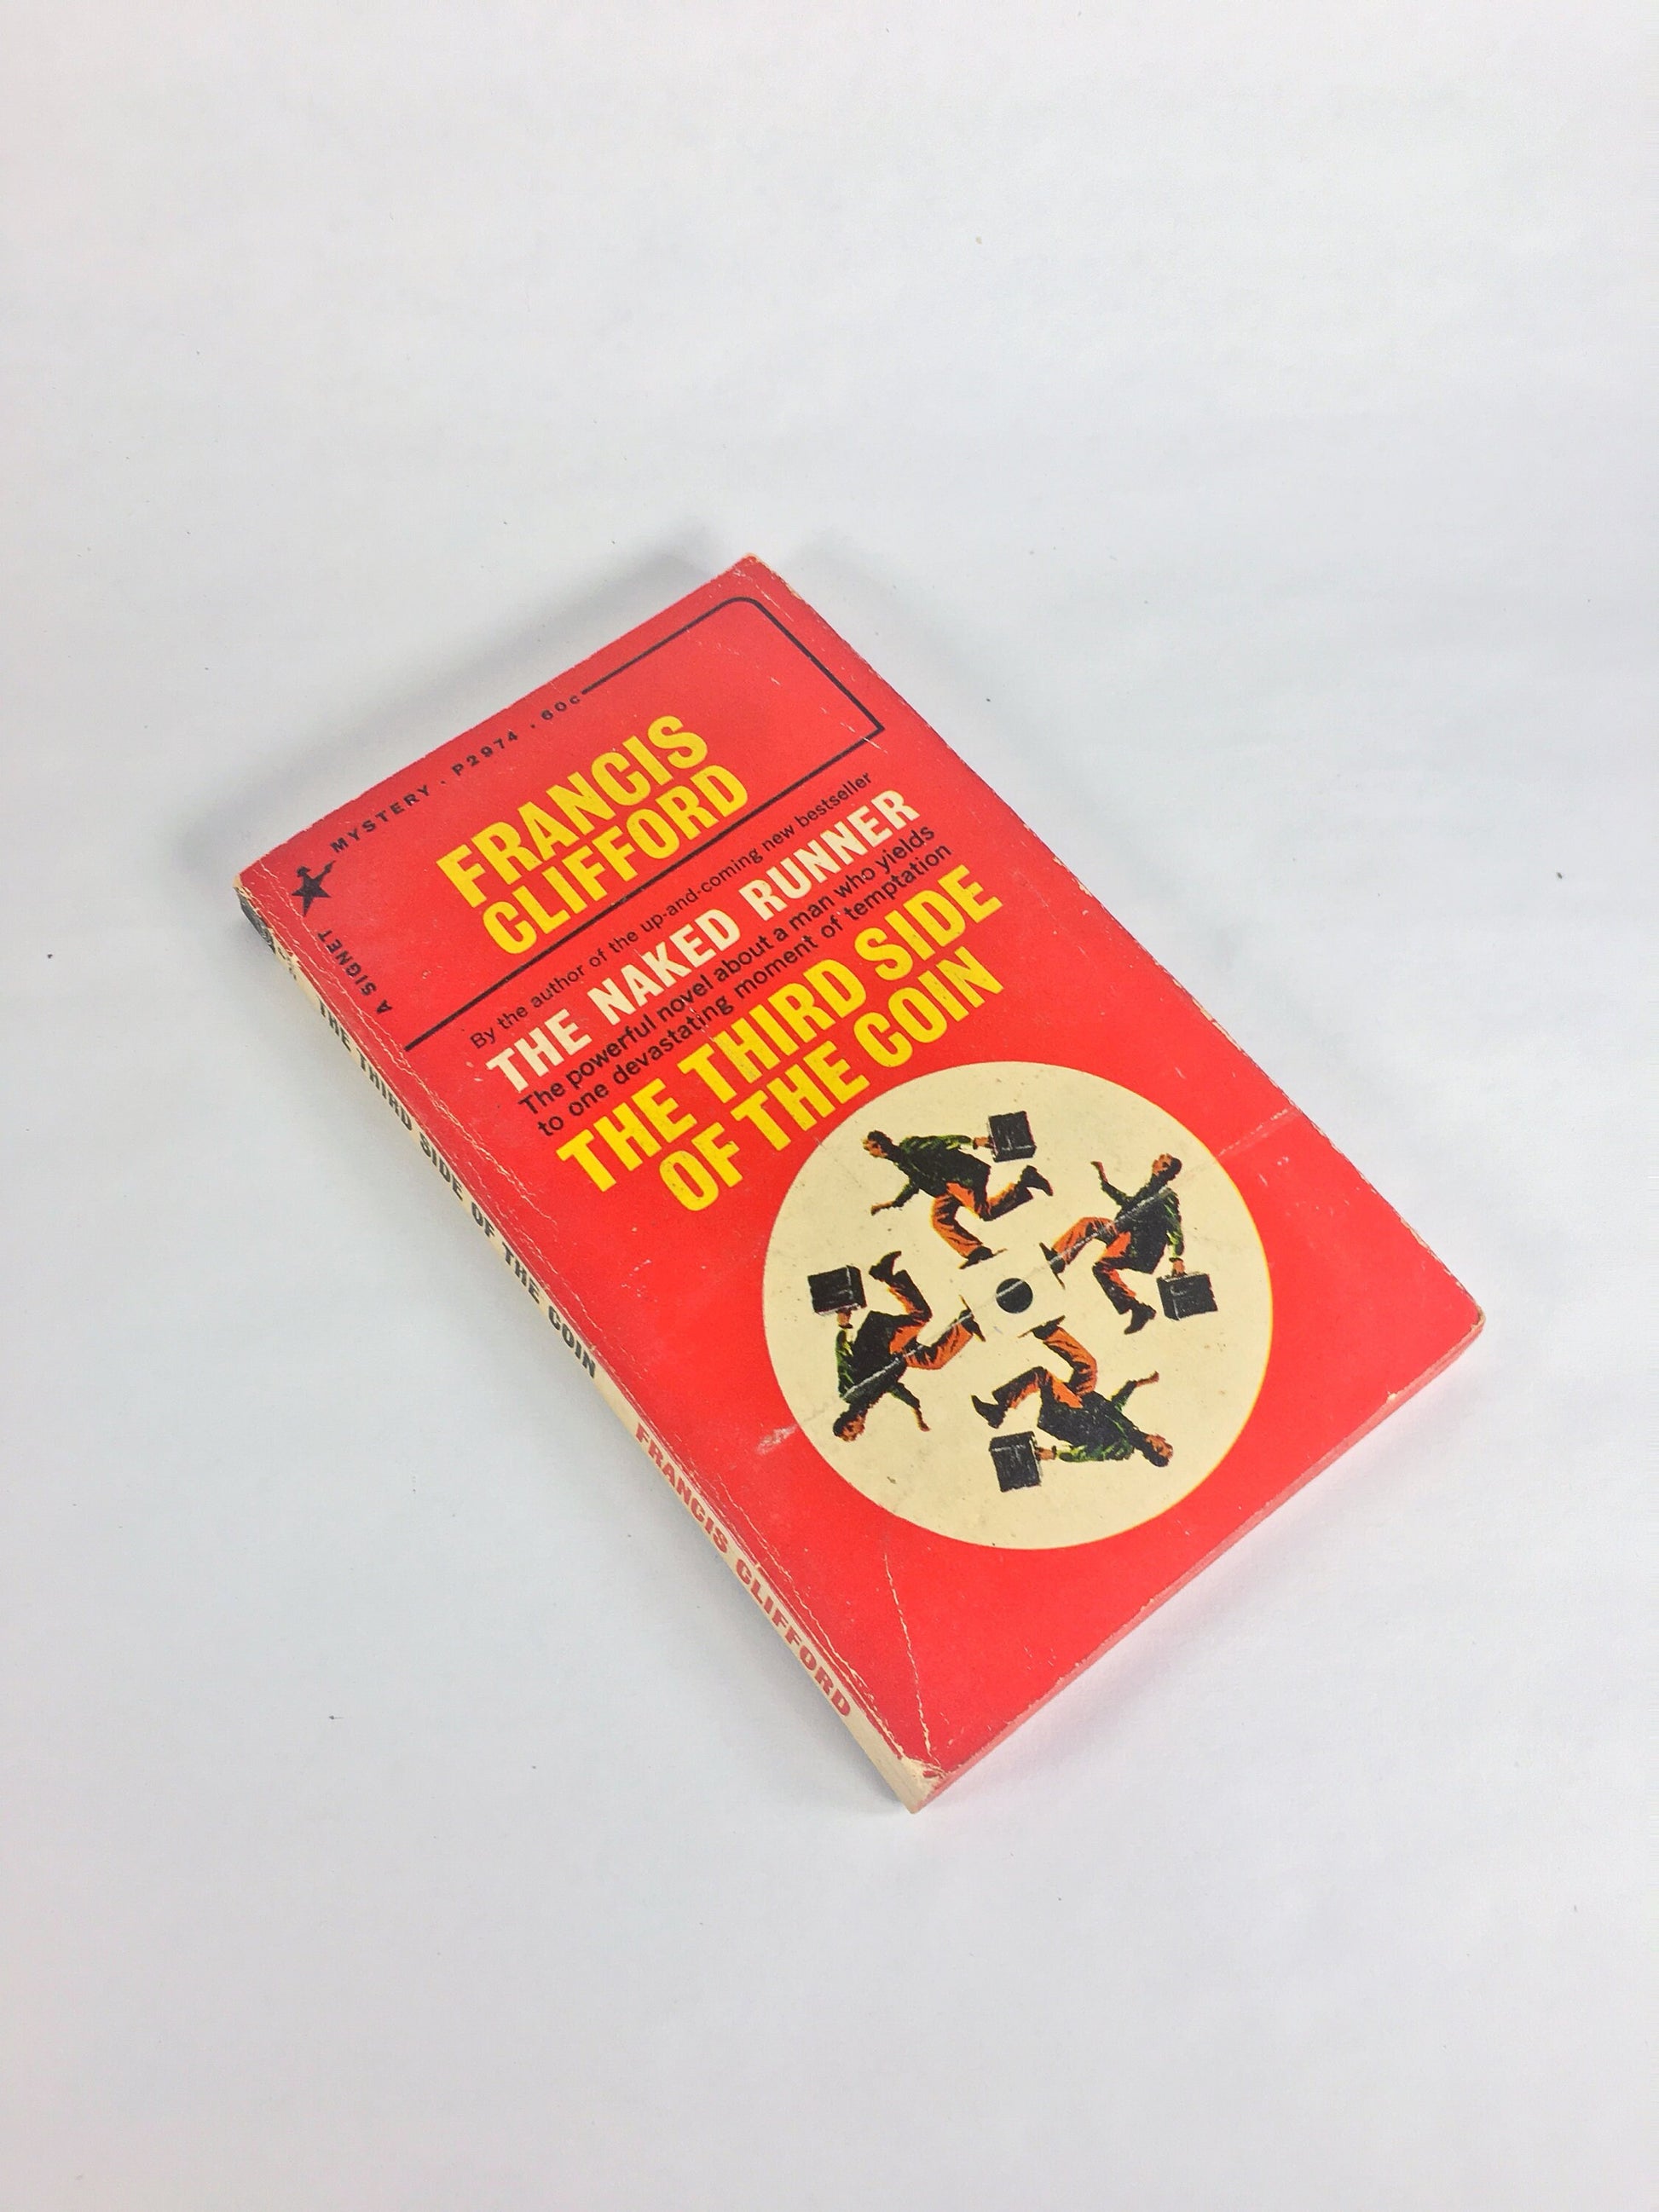 1966 Crime thriller Third side of the Coin by British writer Francis Clifford aka Arthur Bell Thompson Vintage paperback about impulse crime